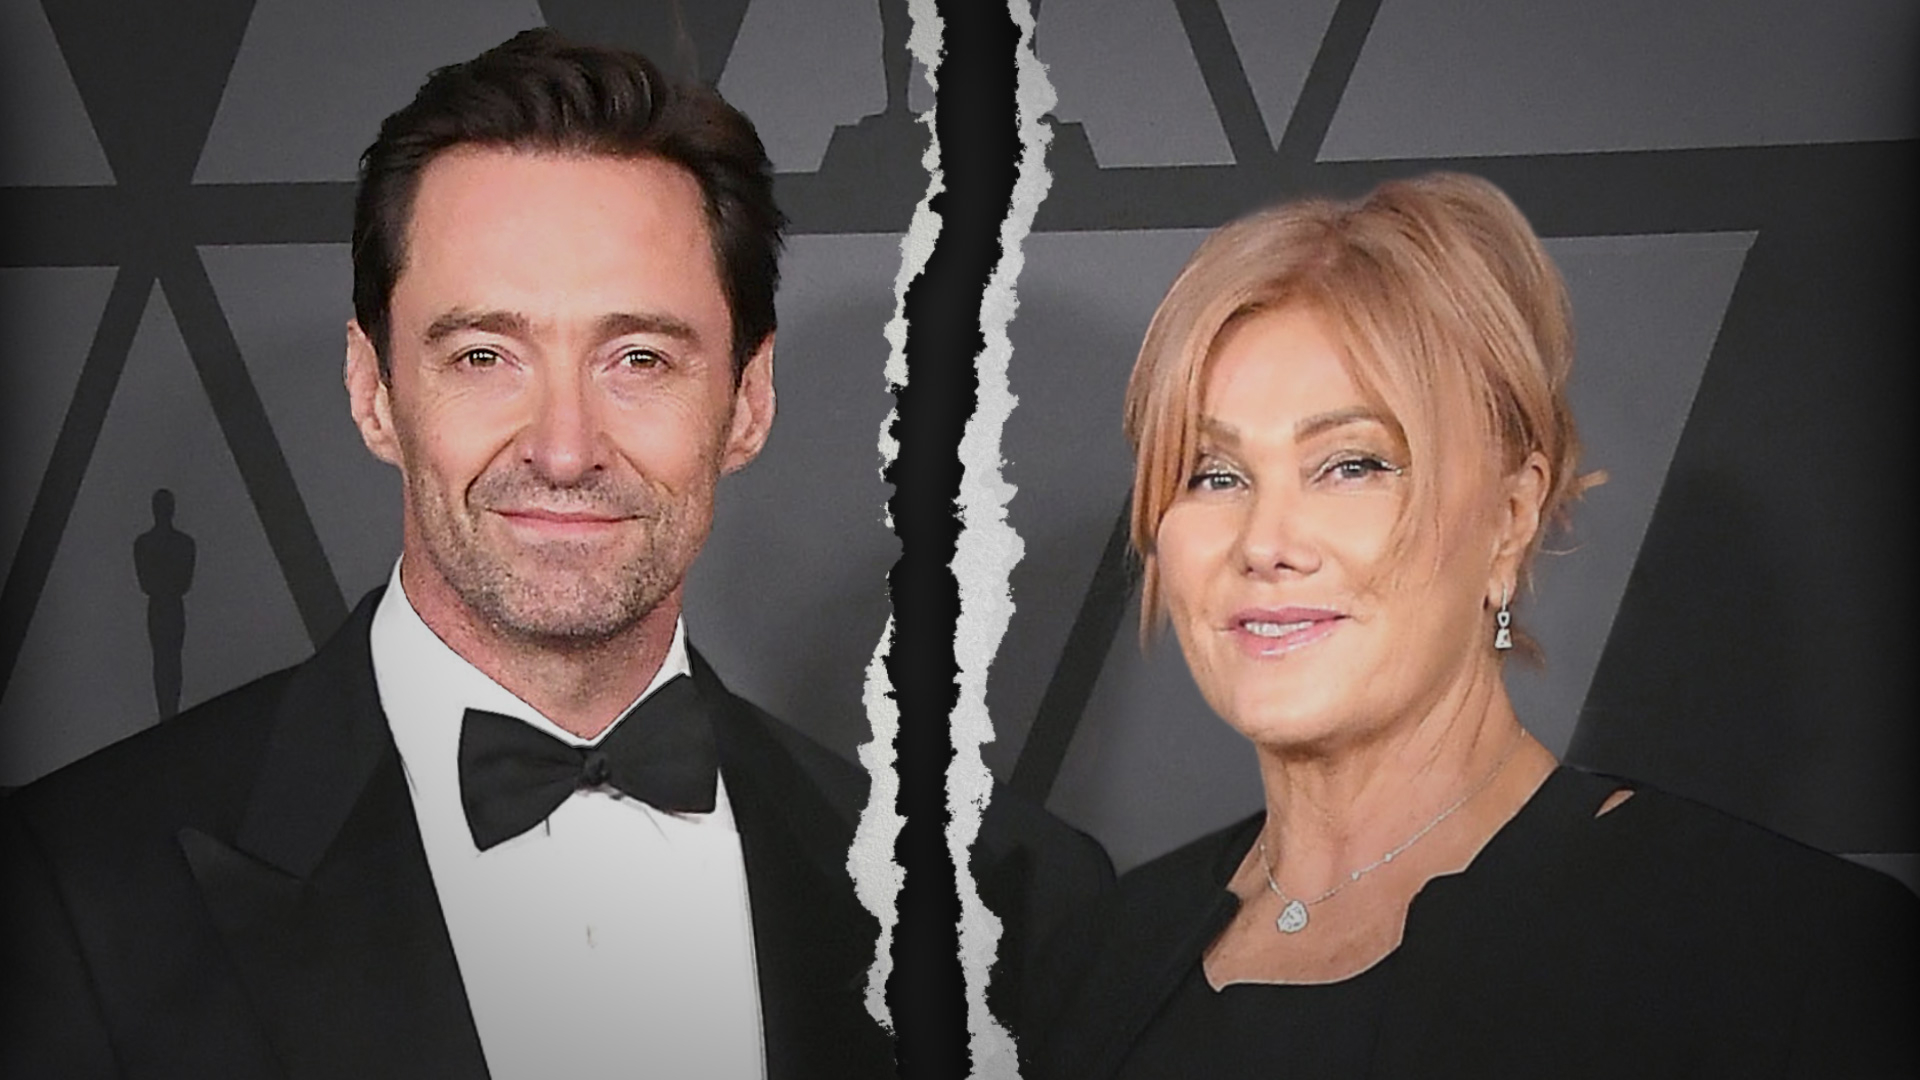 Hugh Jackman's wife in good spirits as she ditches wedding ring days before  divorce | IBTimes UK